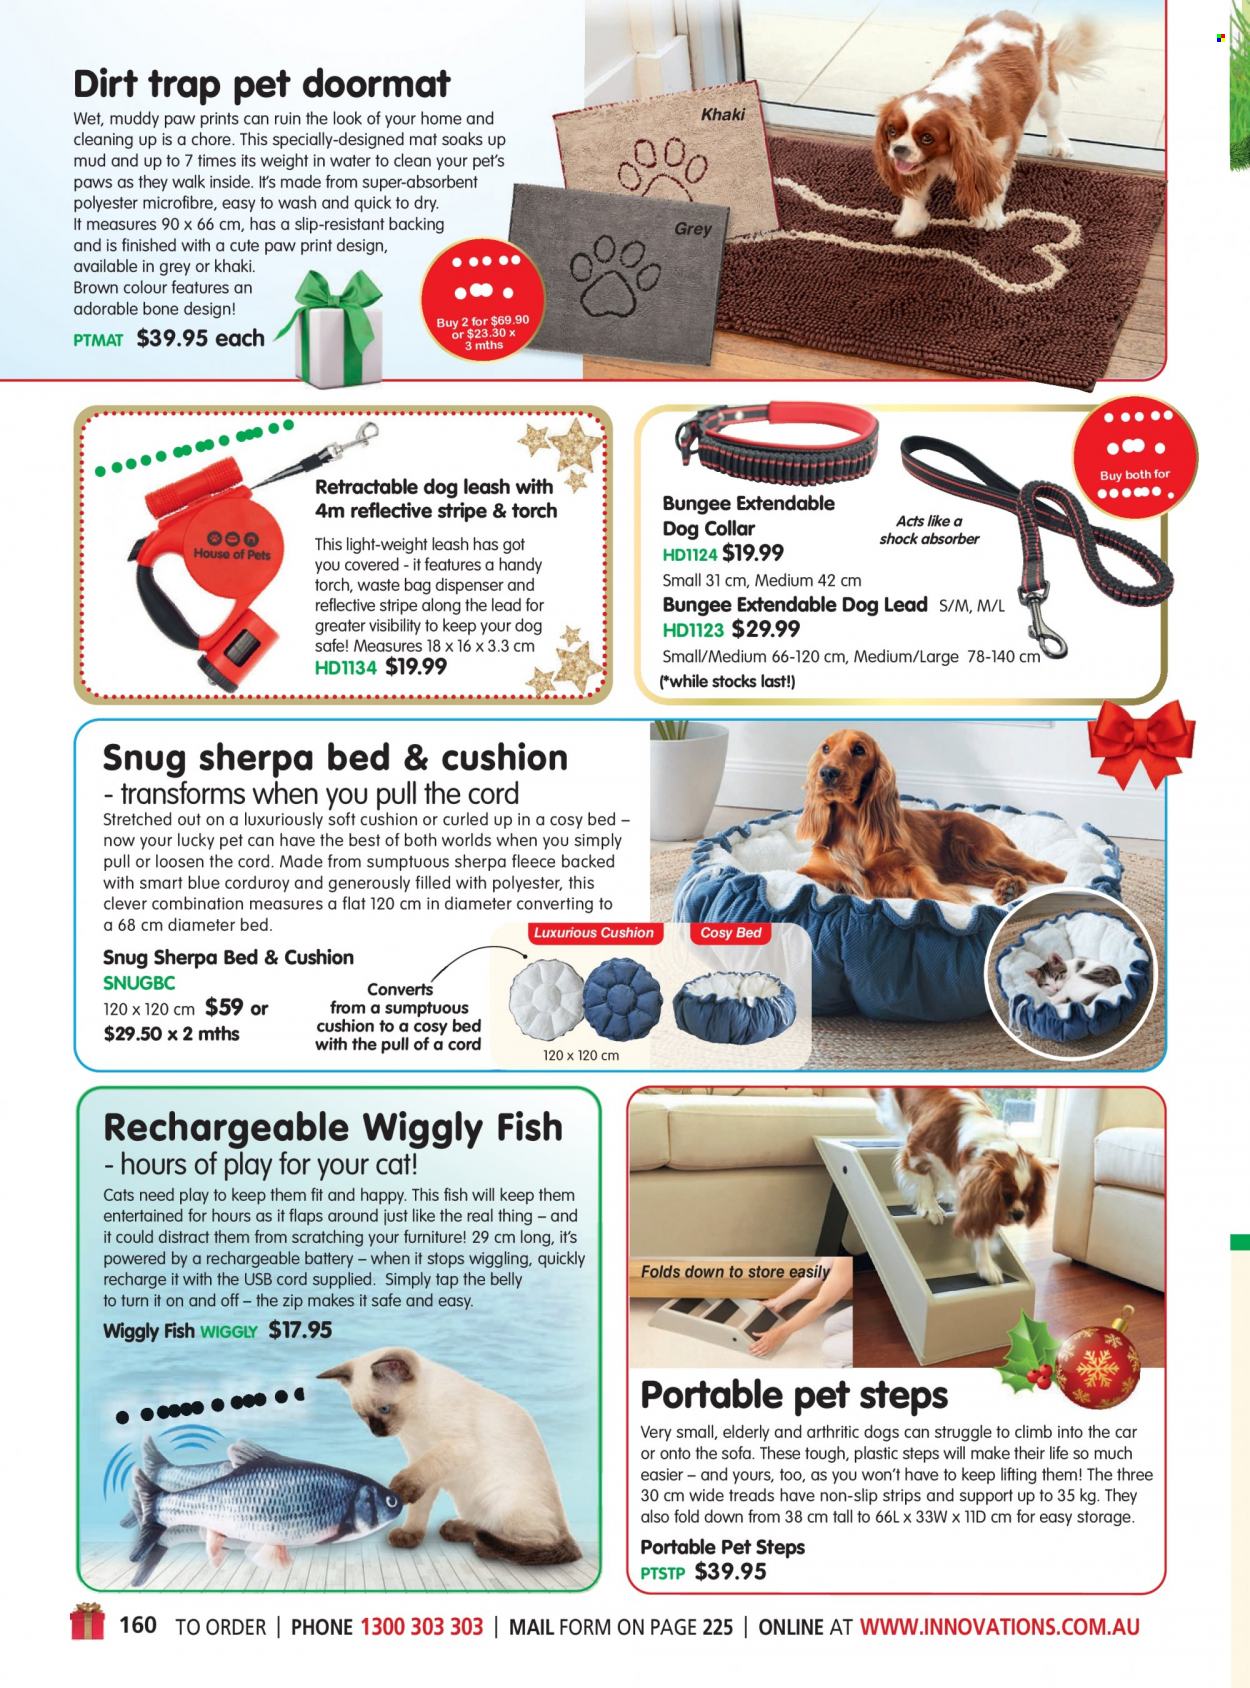 thumbnail - Innovations Catalogue - Sales products - dispenser, bag, cushion, Paws, dog collar, dog lead, sherpa, Snug. Page 160.